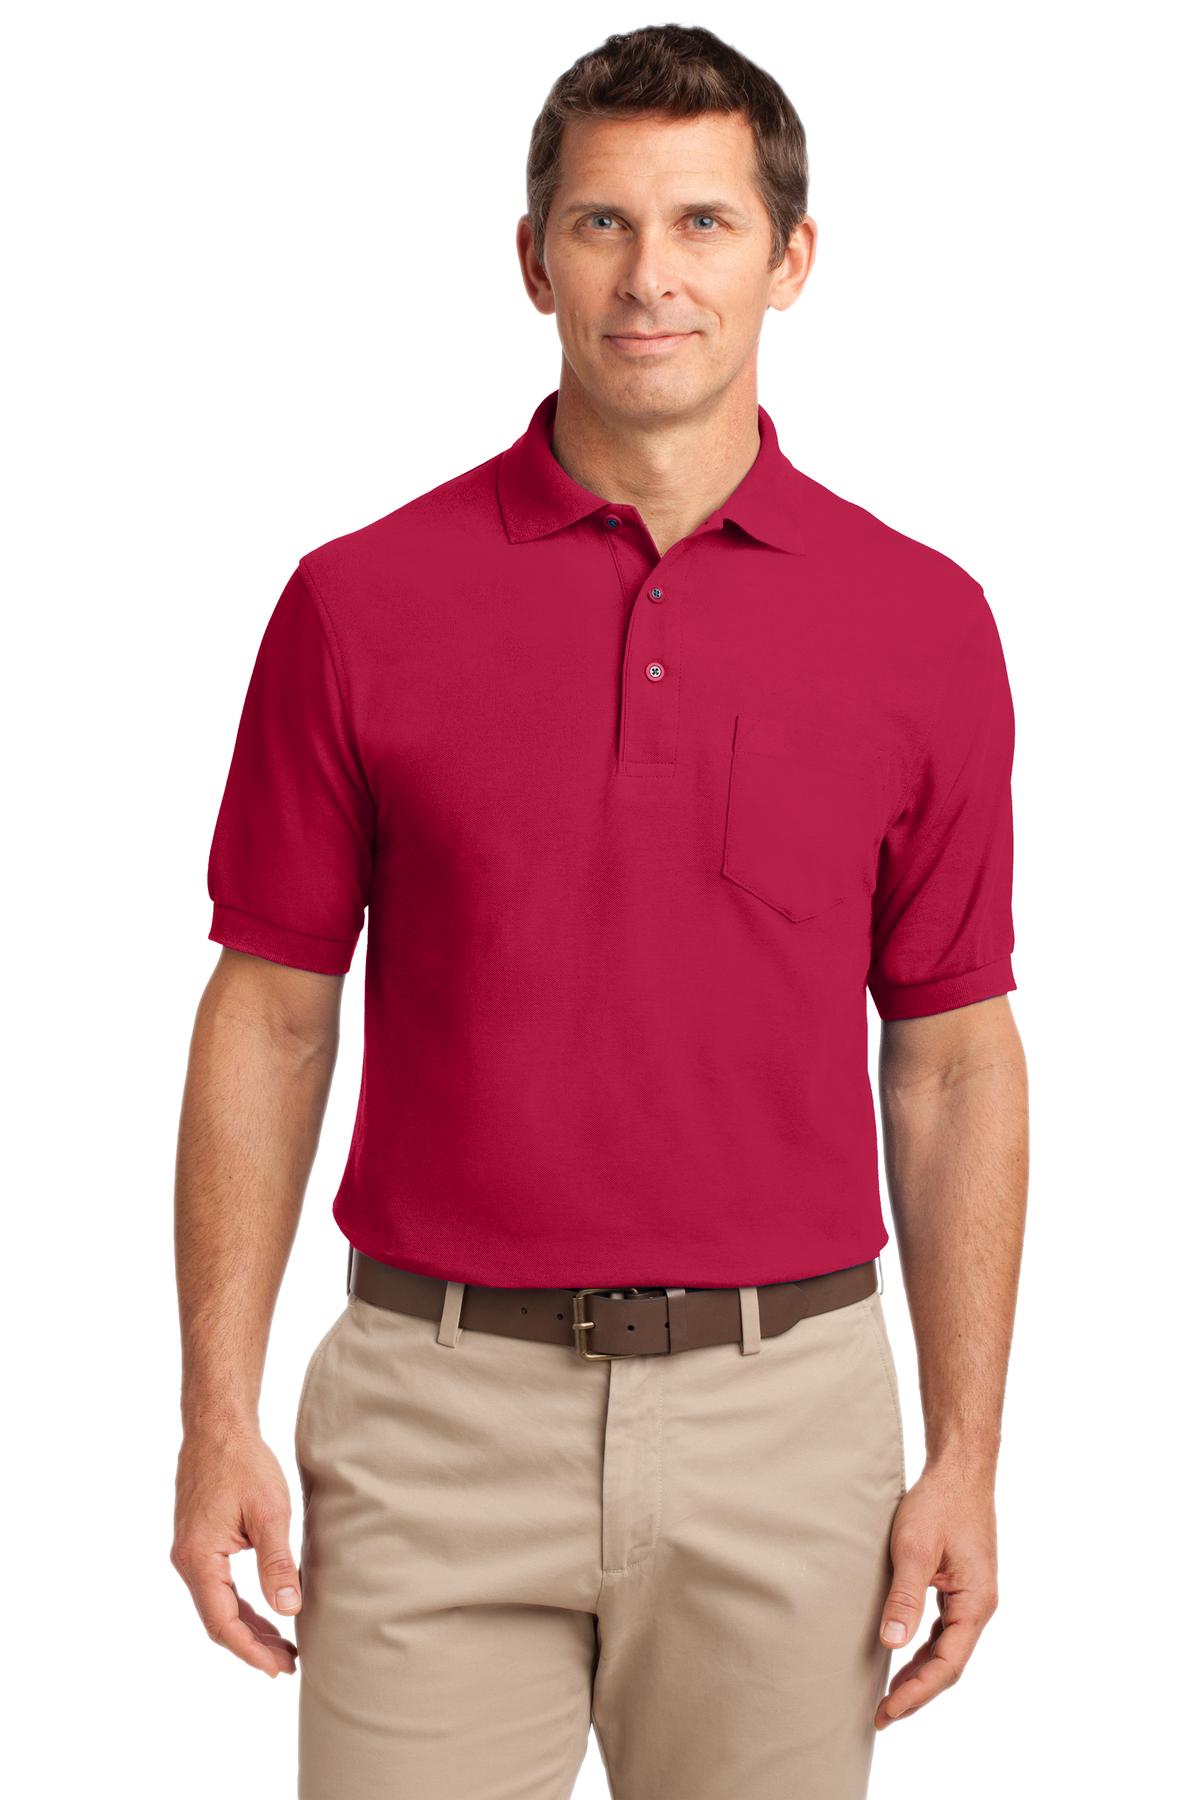 Silk Touch™ Polo with Pocket.  K500P